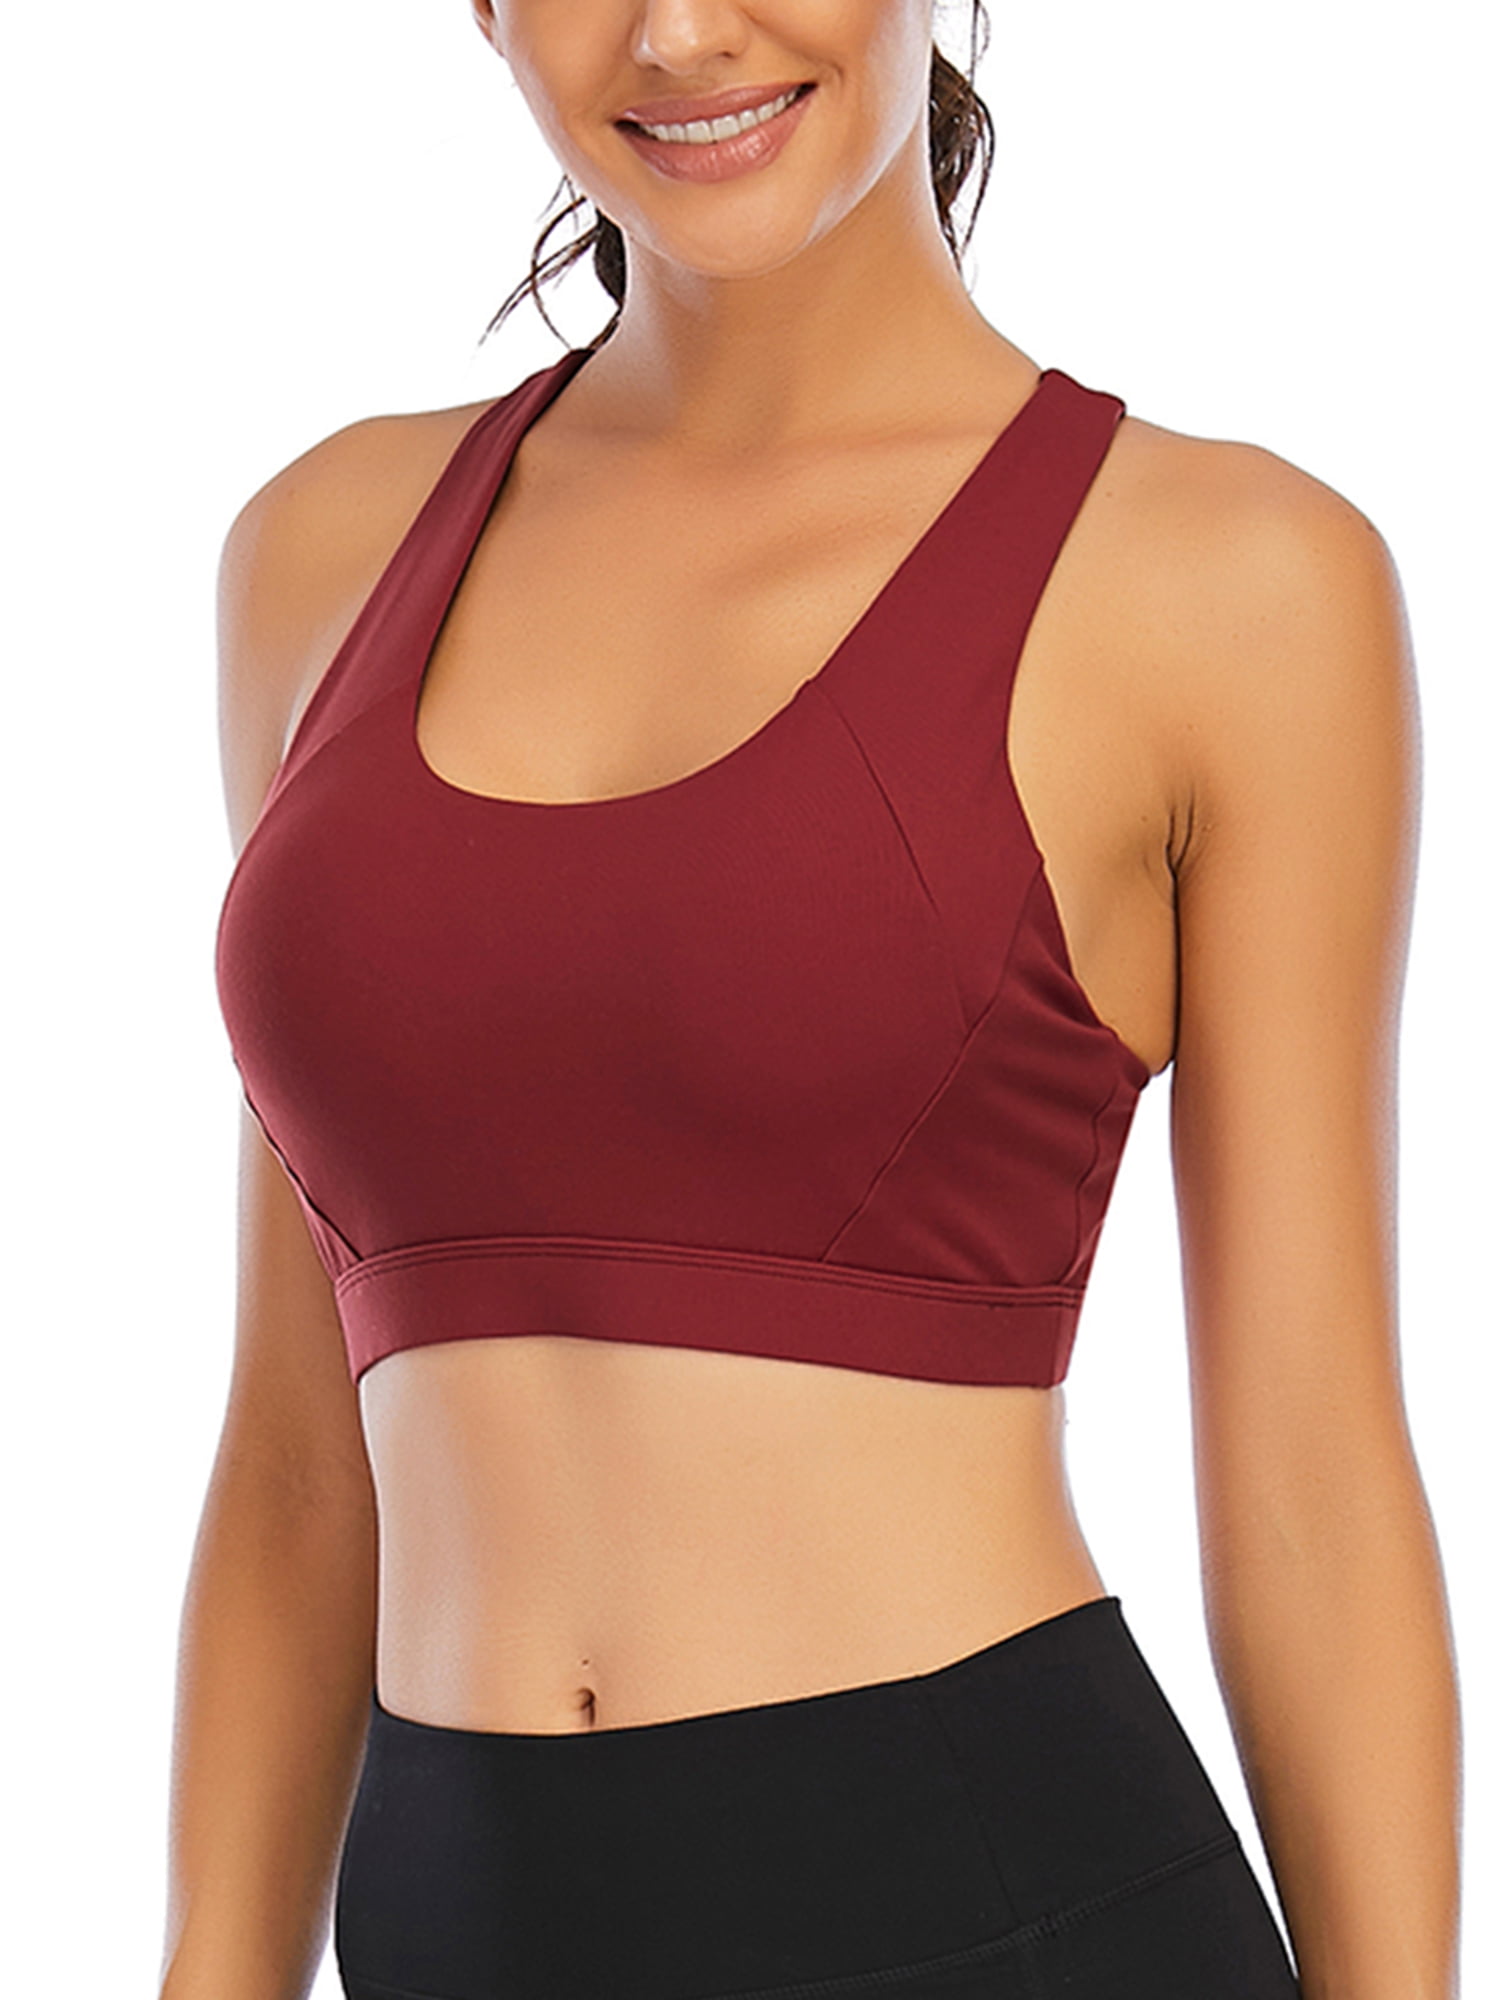 Women's Seamless Sports Bra Racerback Padded Stretch Fitness Tops Workout  Yoga Bras with Removable Bra Pads 